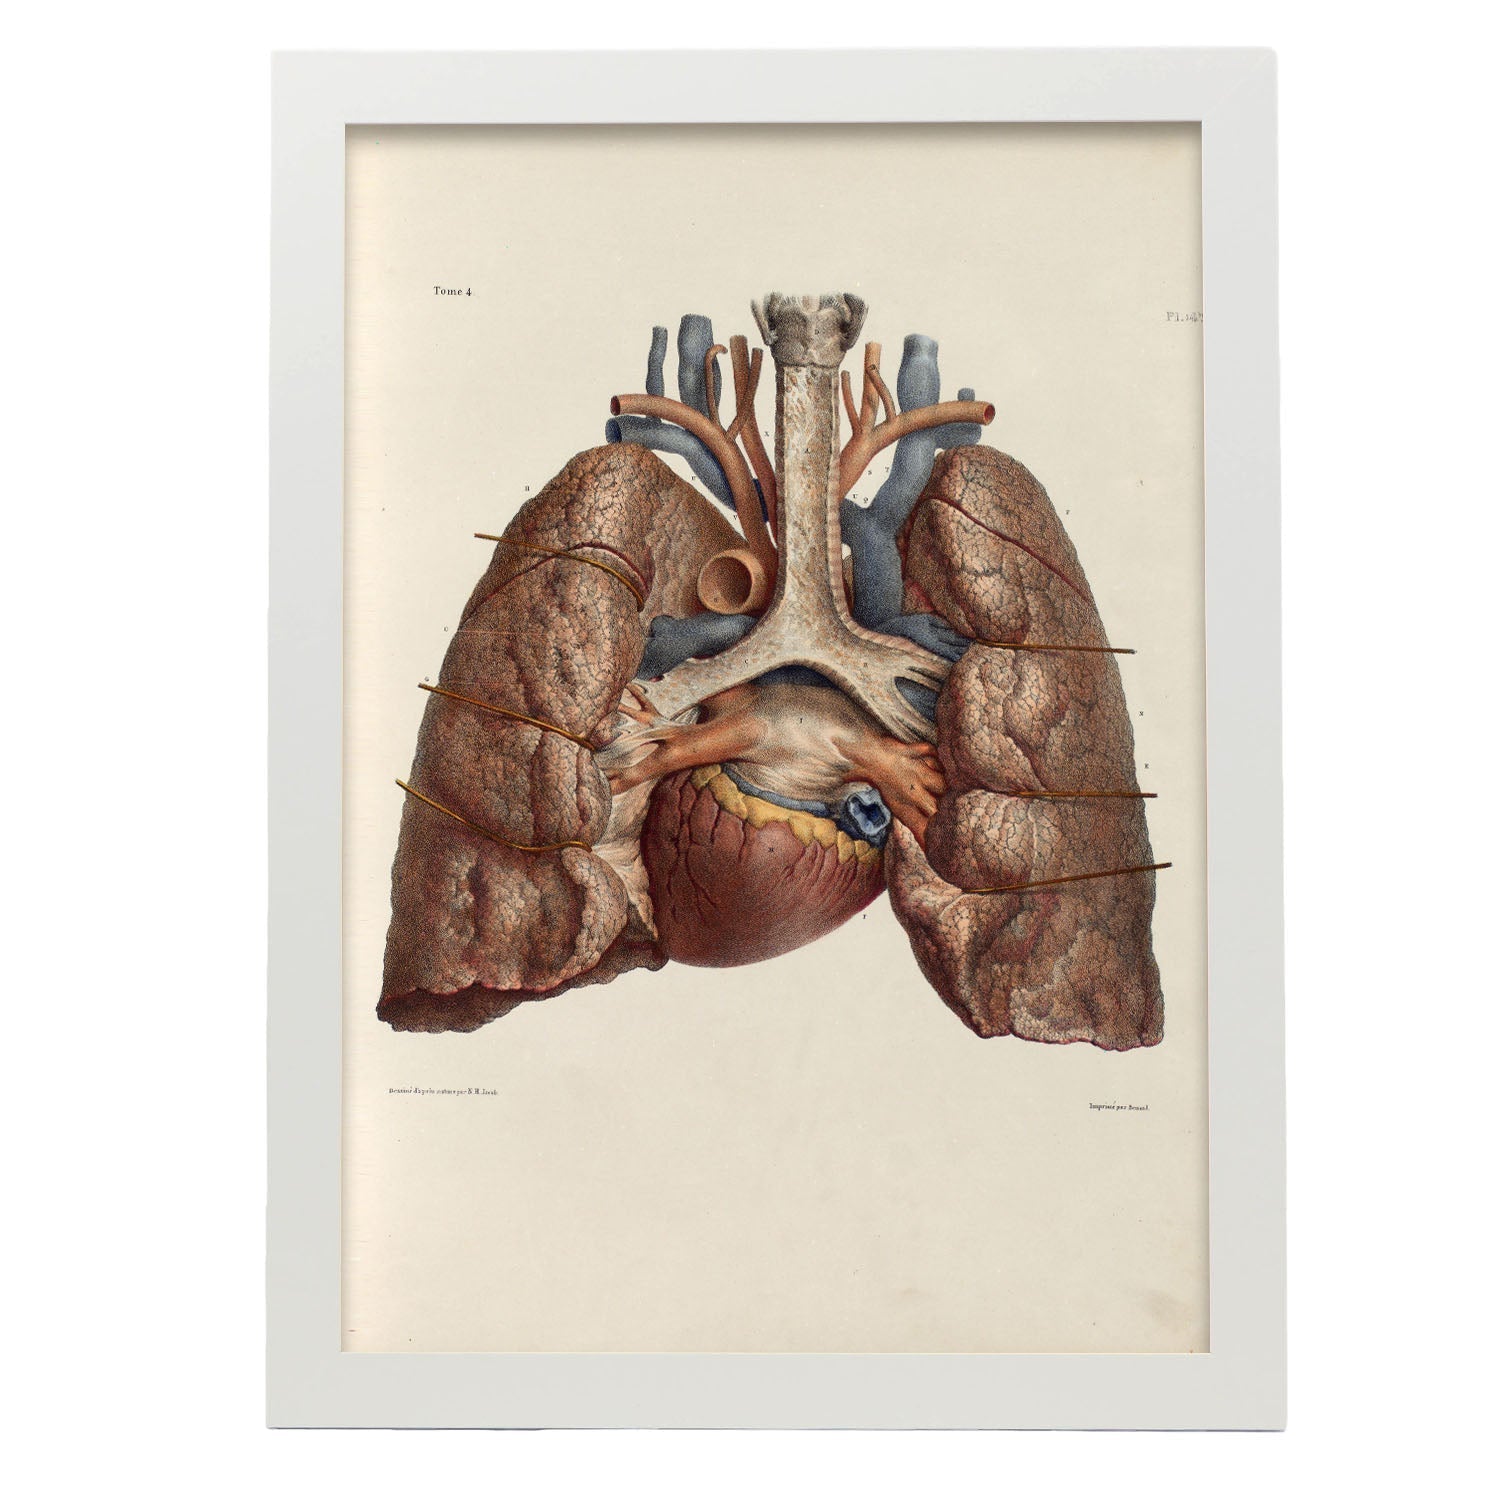 Heart, lungs, trachea and laryngeal cartilages-Artwork-Nacnic-A3-Marco Blanco-Nacnic Estudio SL